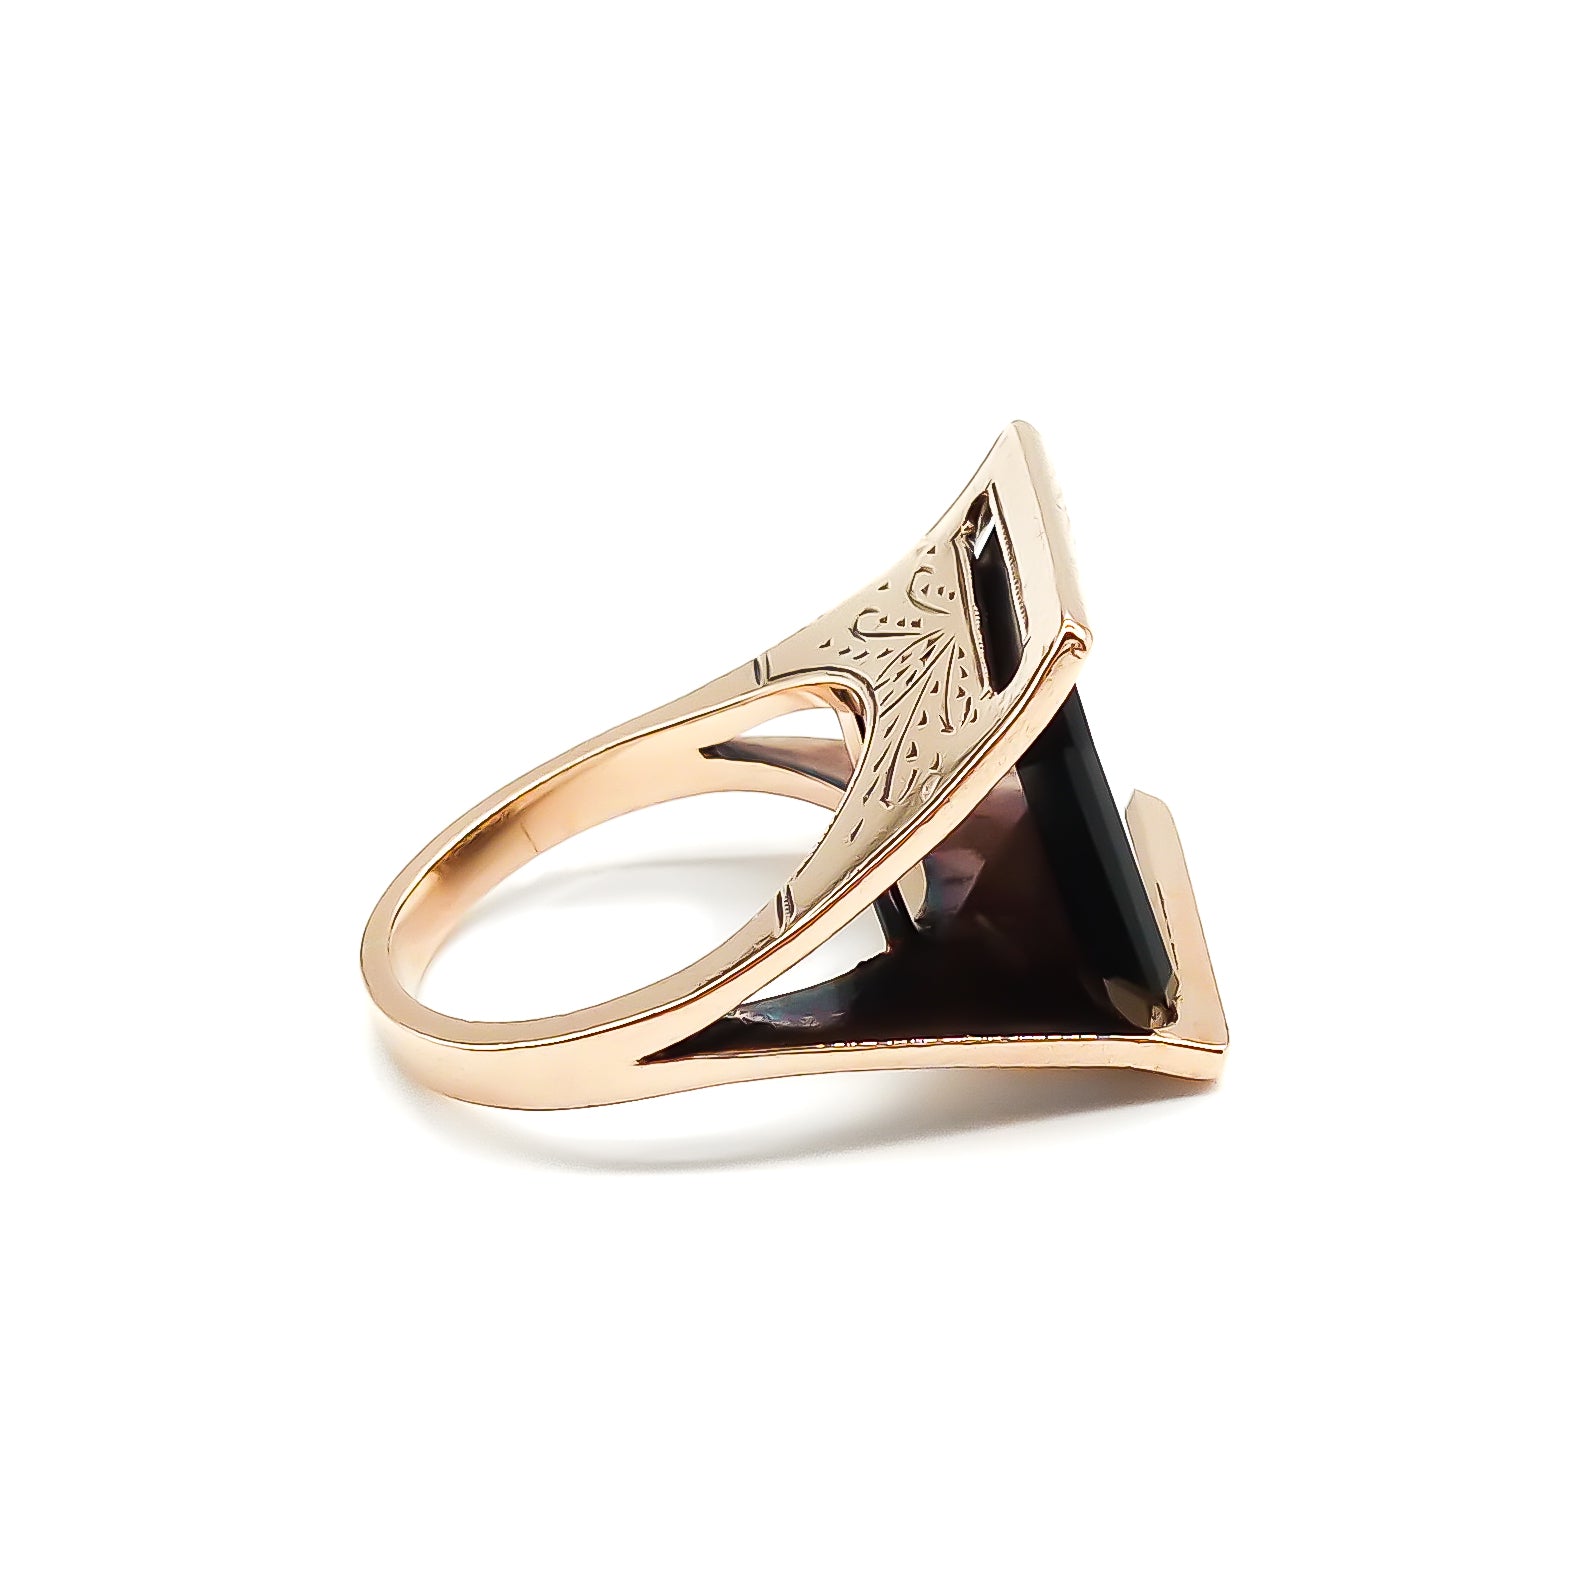 Beautifully engraved rose gold ring set with a rectangular onyx disc. Circa 1950’s